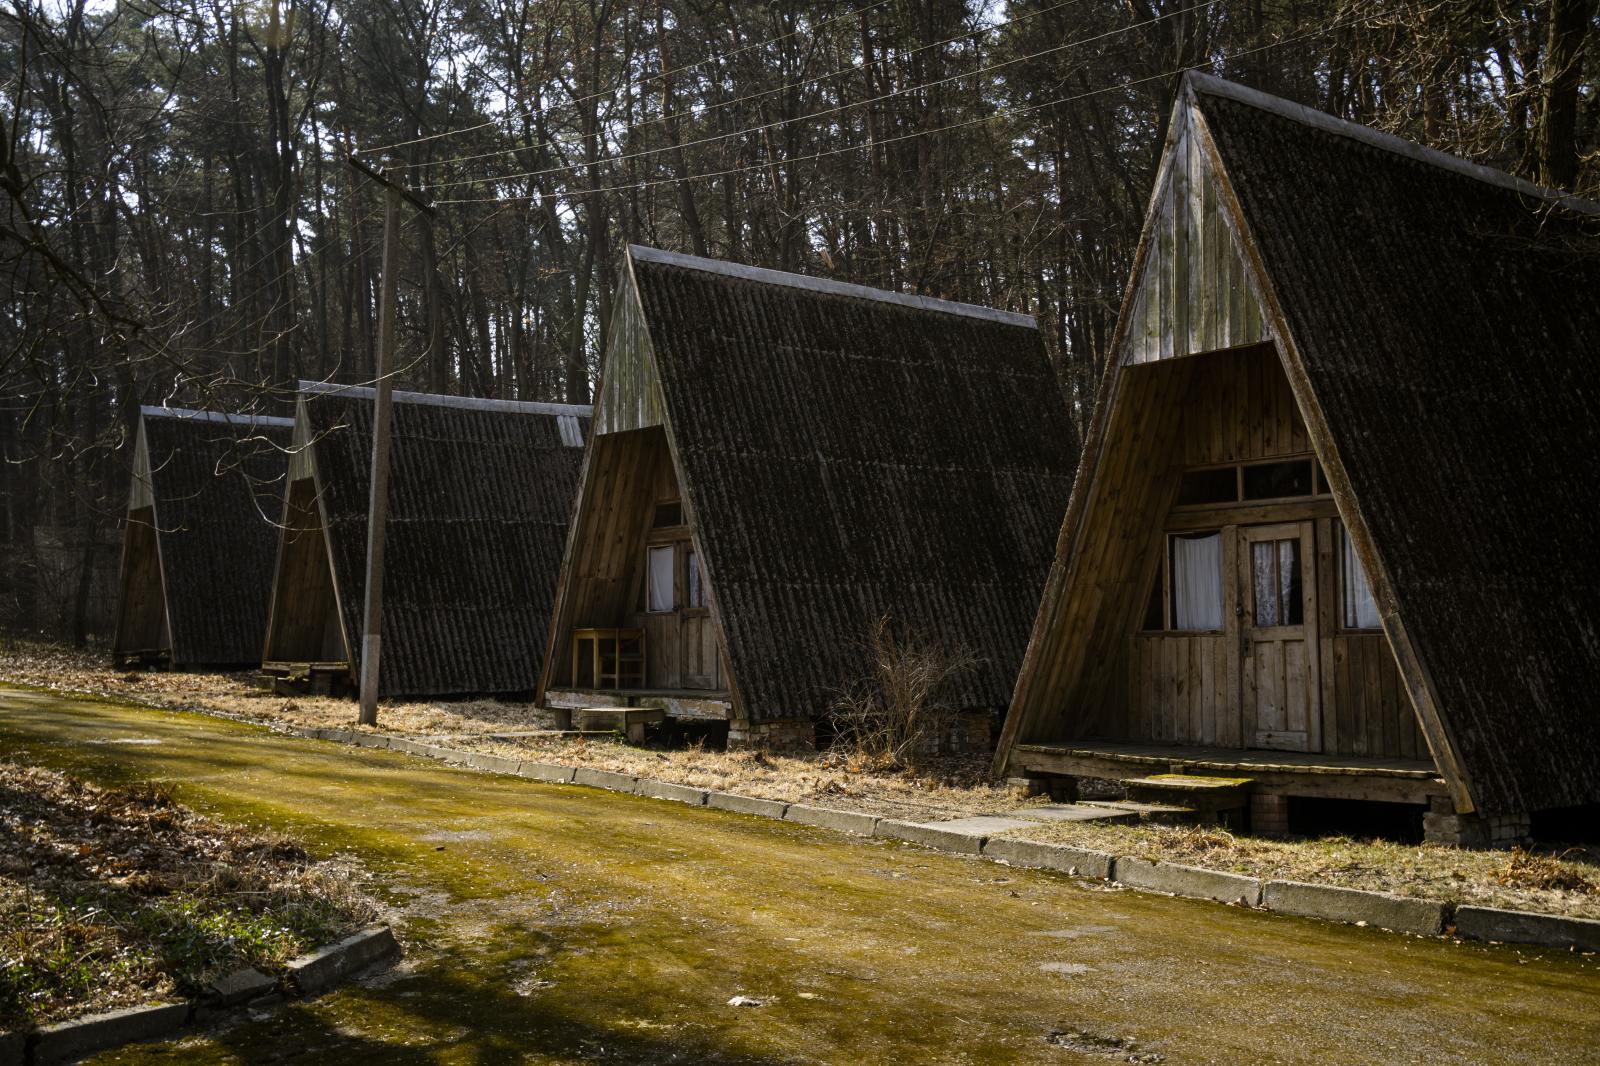 Wooden huts in the nature reserve Rostochia.